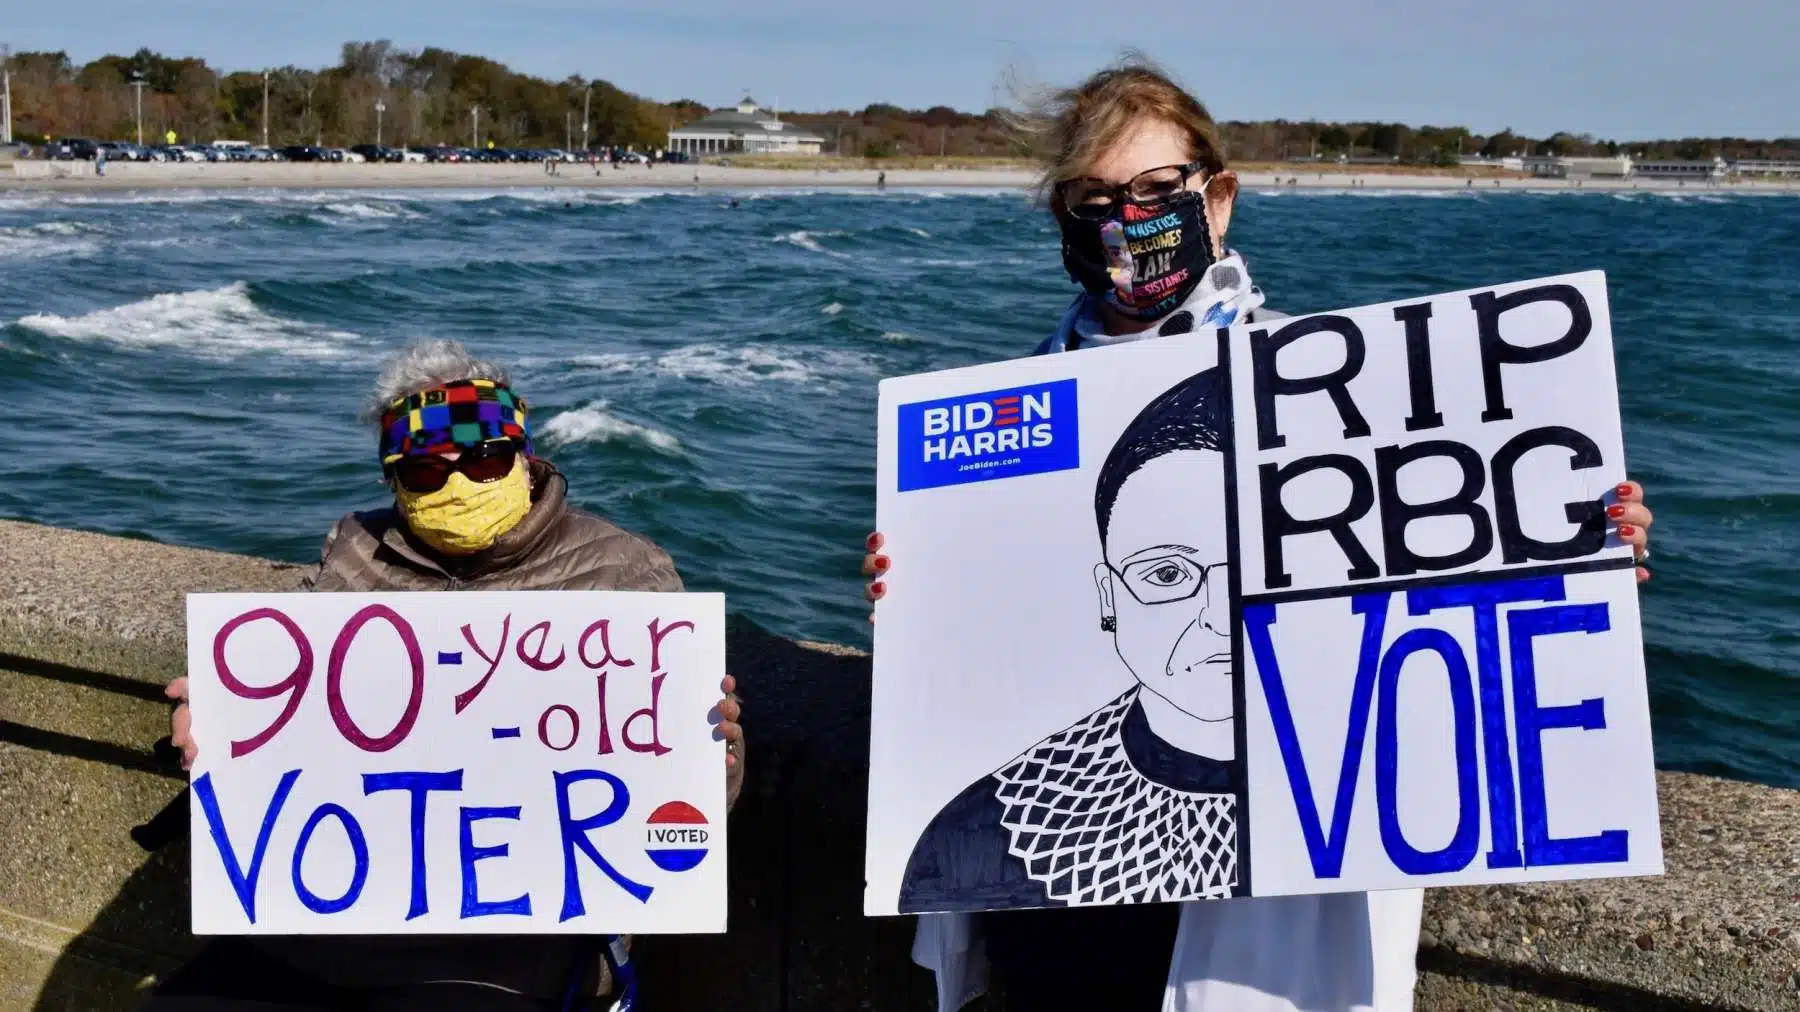 Photos from the Women’s March 2020 event at the Narragansett Sea Wall